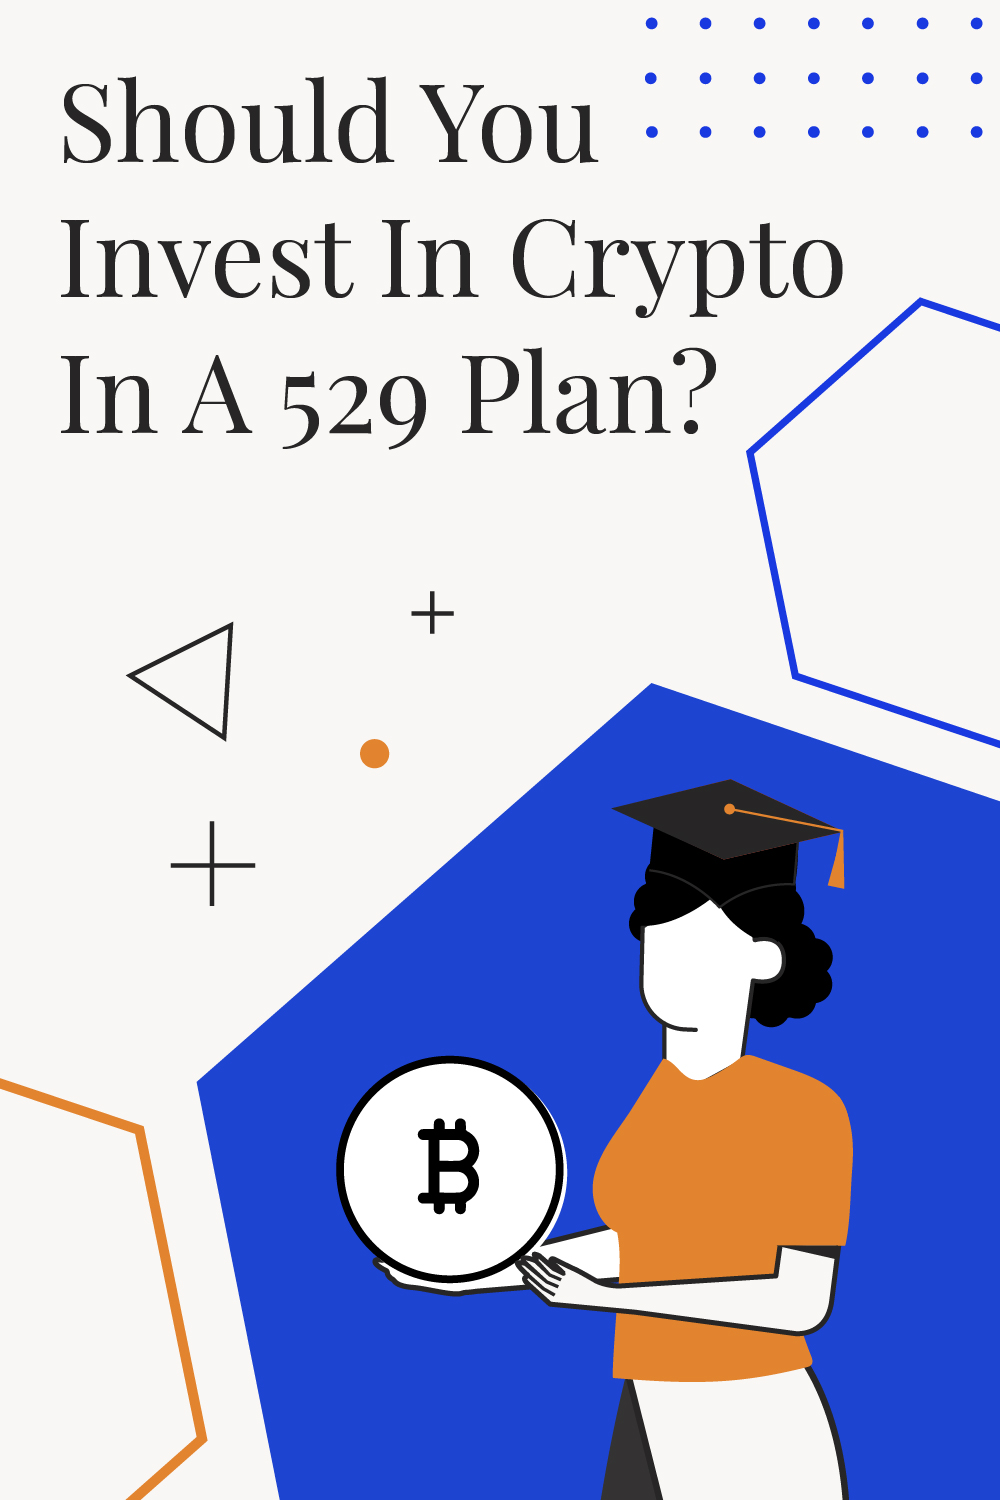 Should You Invest In Crypto In A 529 Plan?